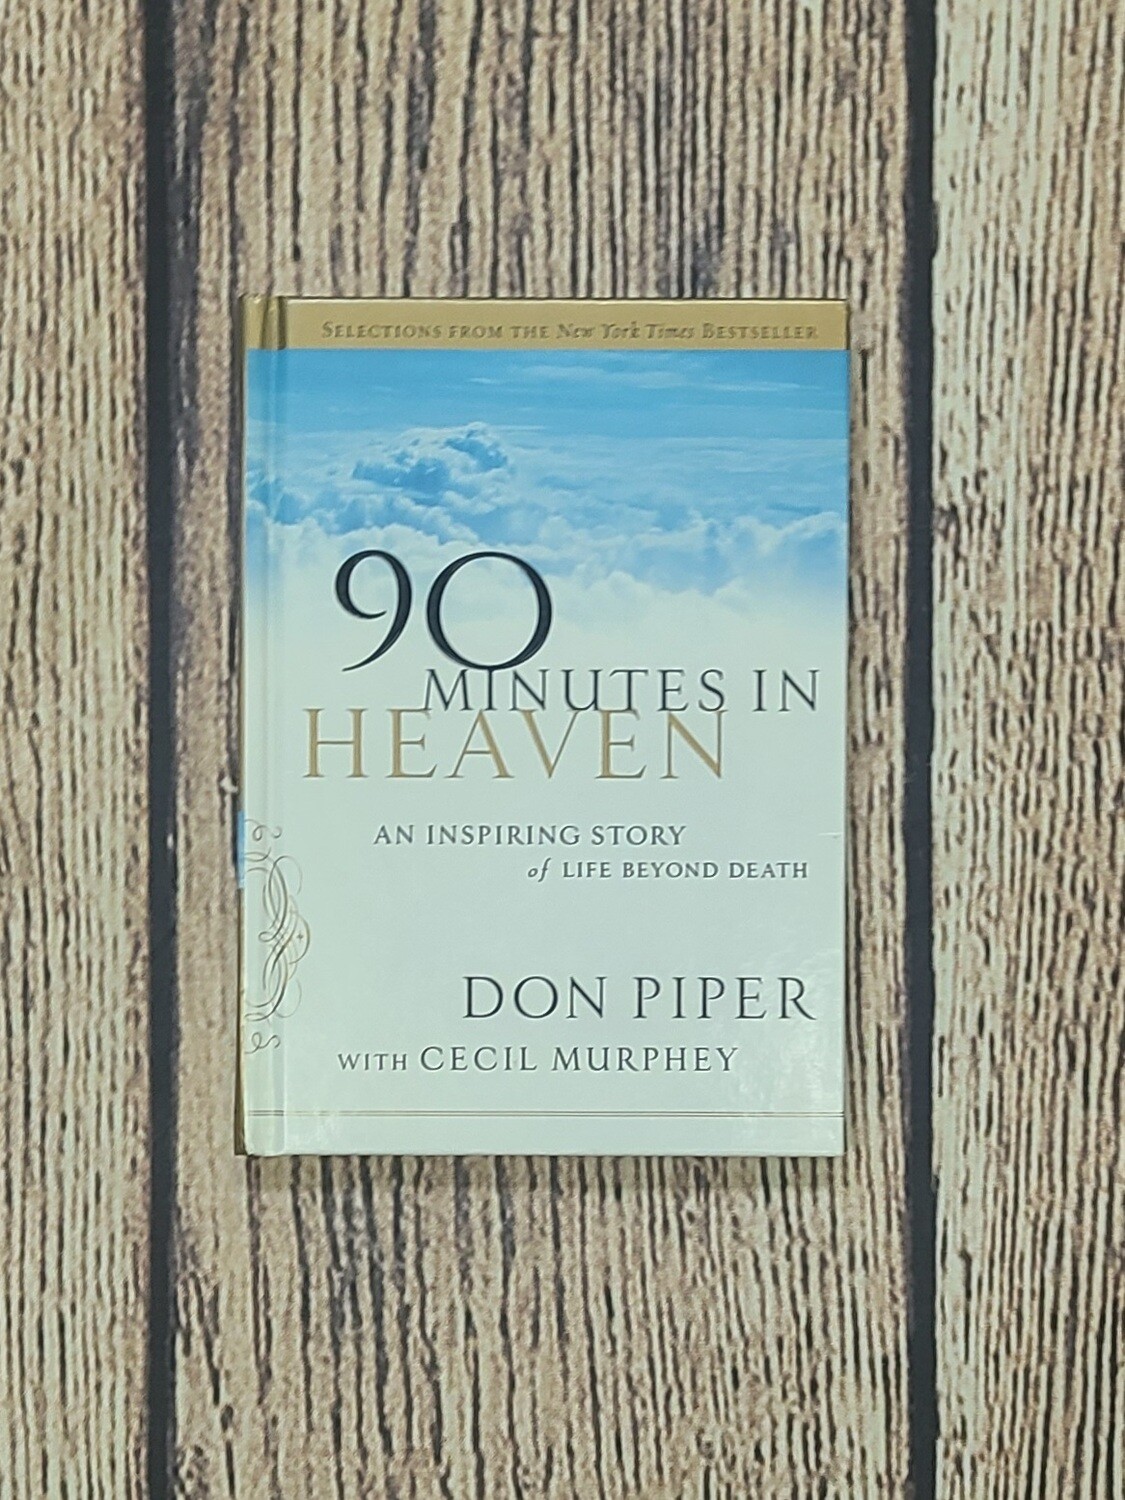 90 Minutes in Heaven: An Inspiring Story of Life Beyond Death by Don Piper with Cecil Murphey - Hardback